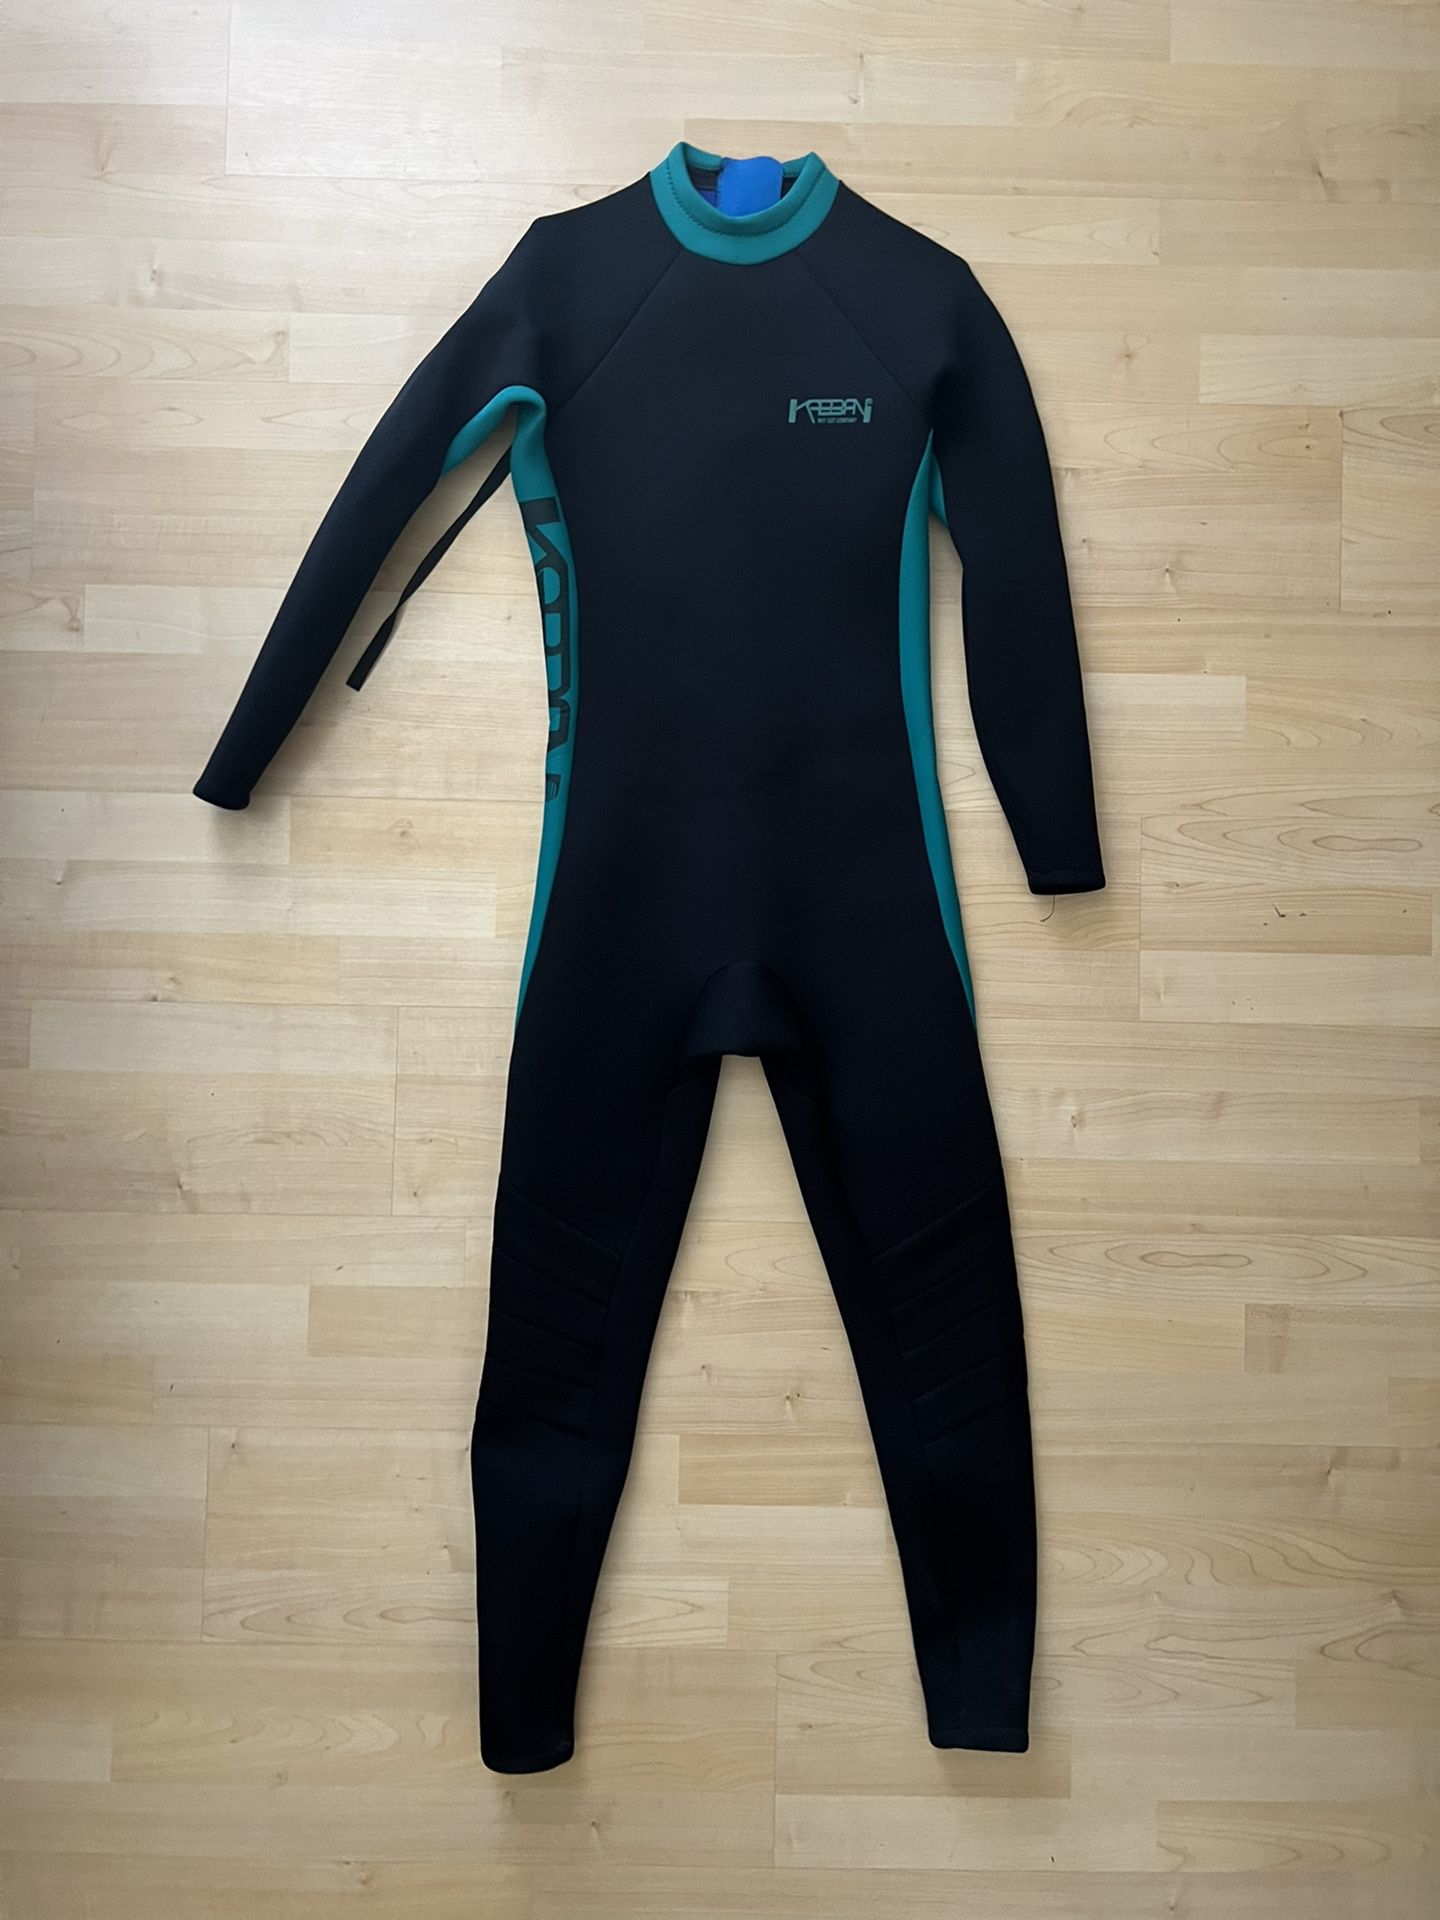 Kabban Full Wetsuit Men’s Large Full 3/2 mm Excellent Condition!